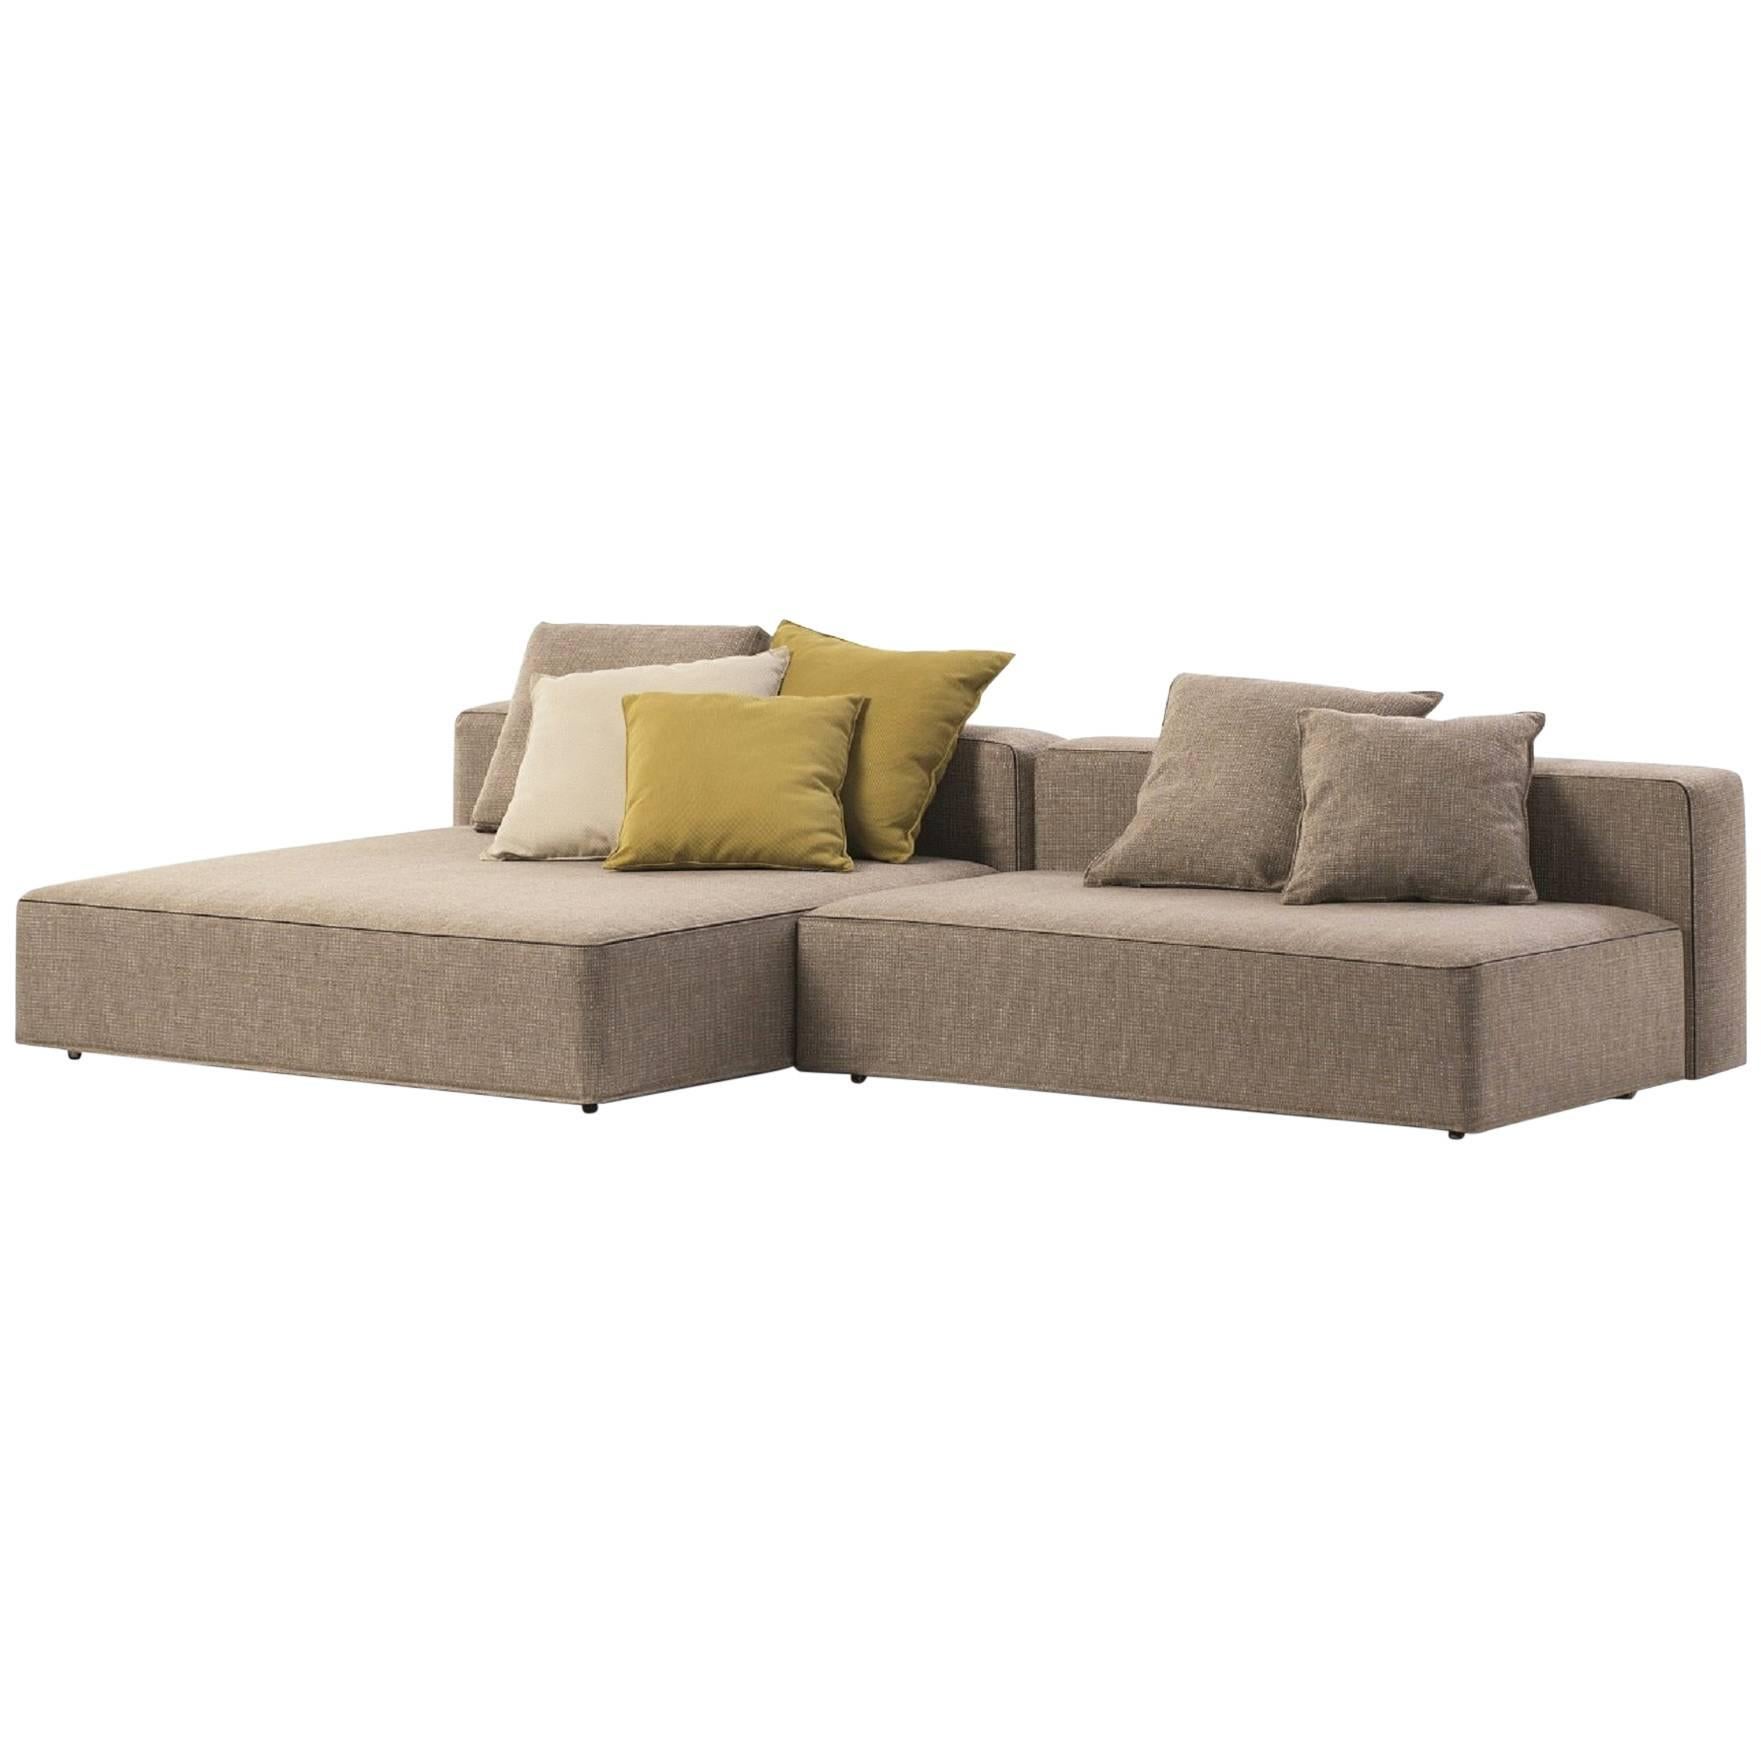 Roda Dandy Indoor/Outdoor Sectional in Plot D01 Sand Upholstery For Sale